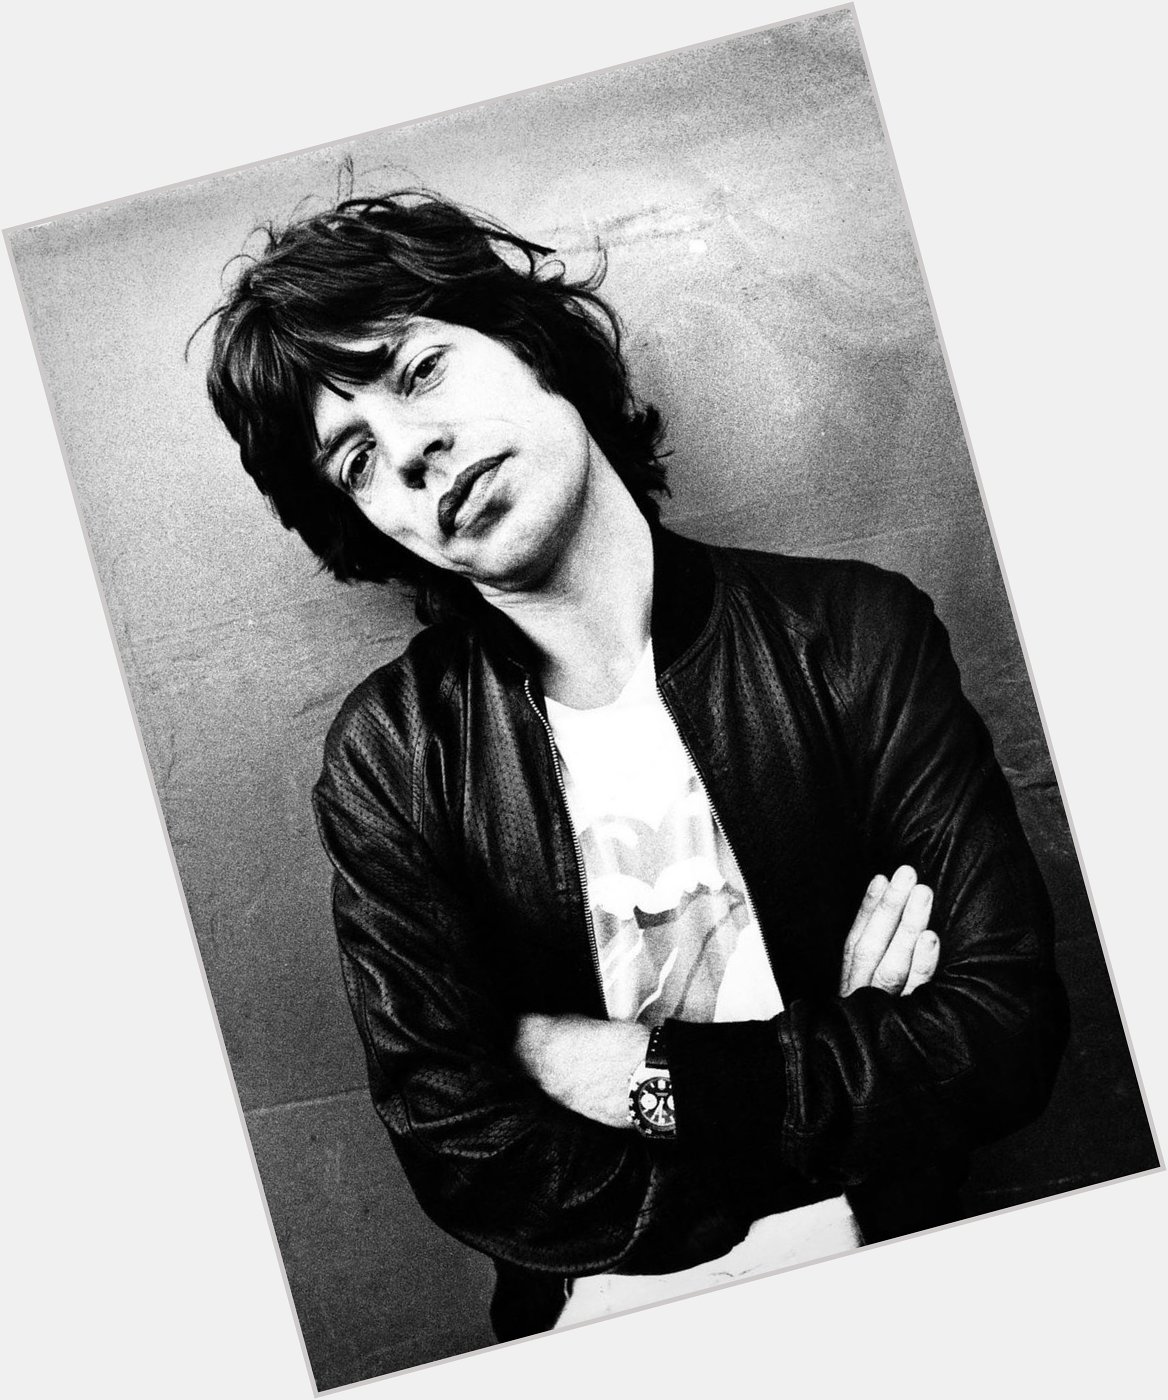 Happy birthday to Mick Jagger, born 26th July 1943. Not bad for 72! 